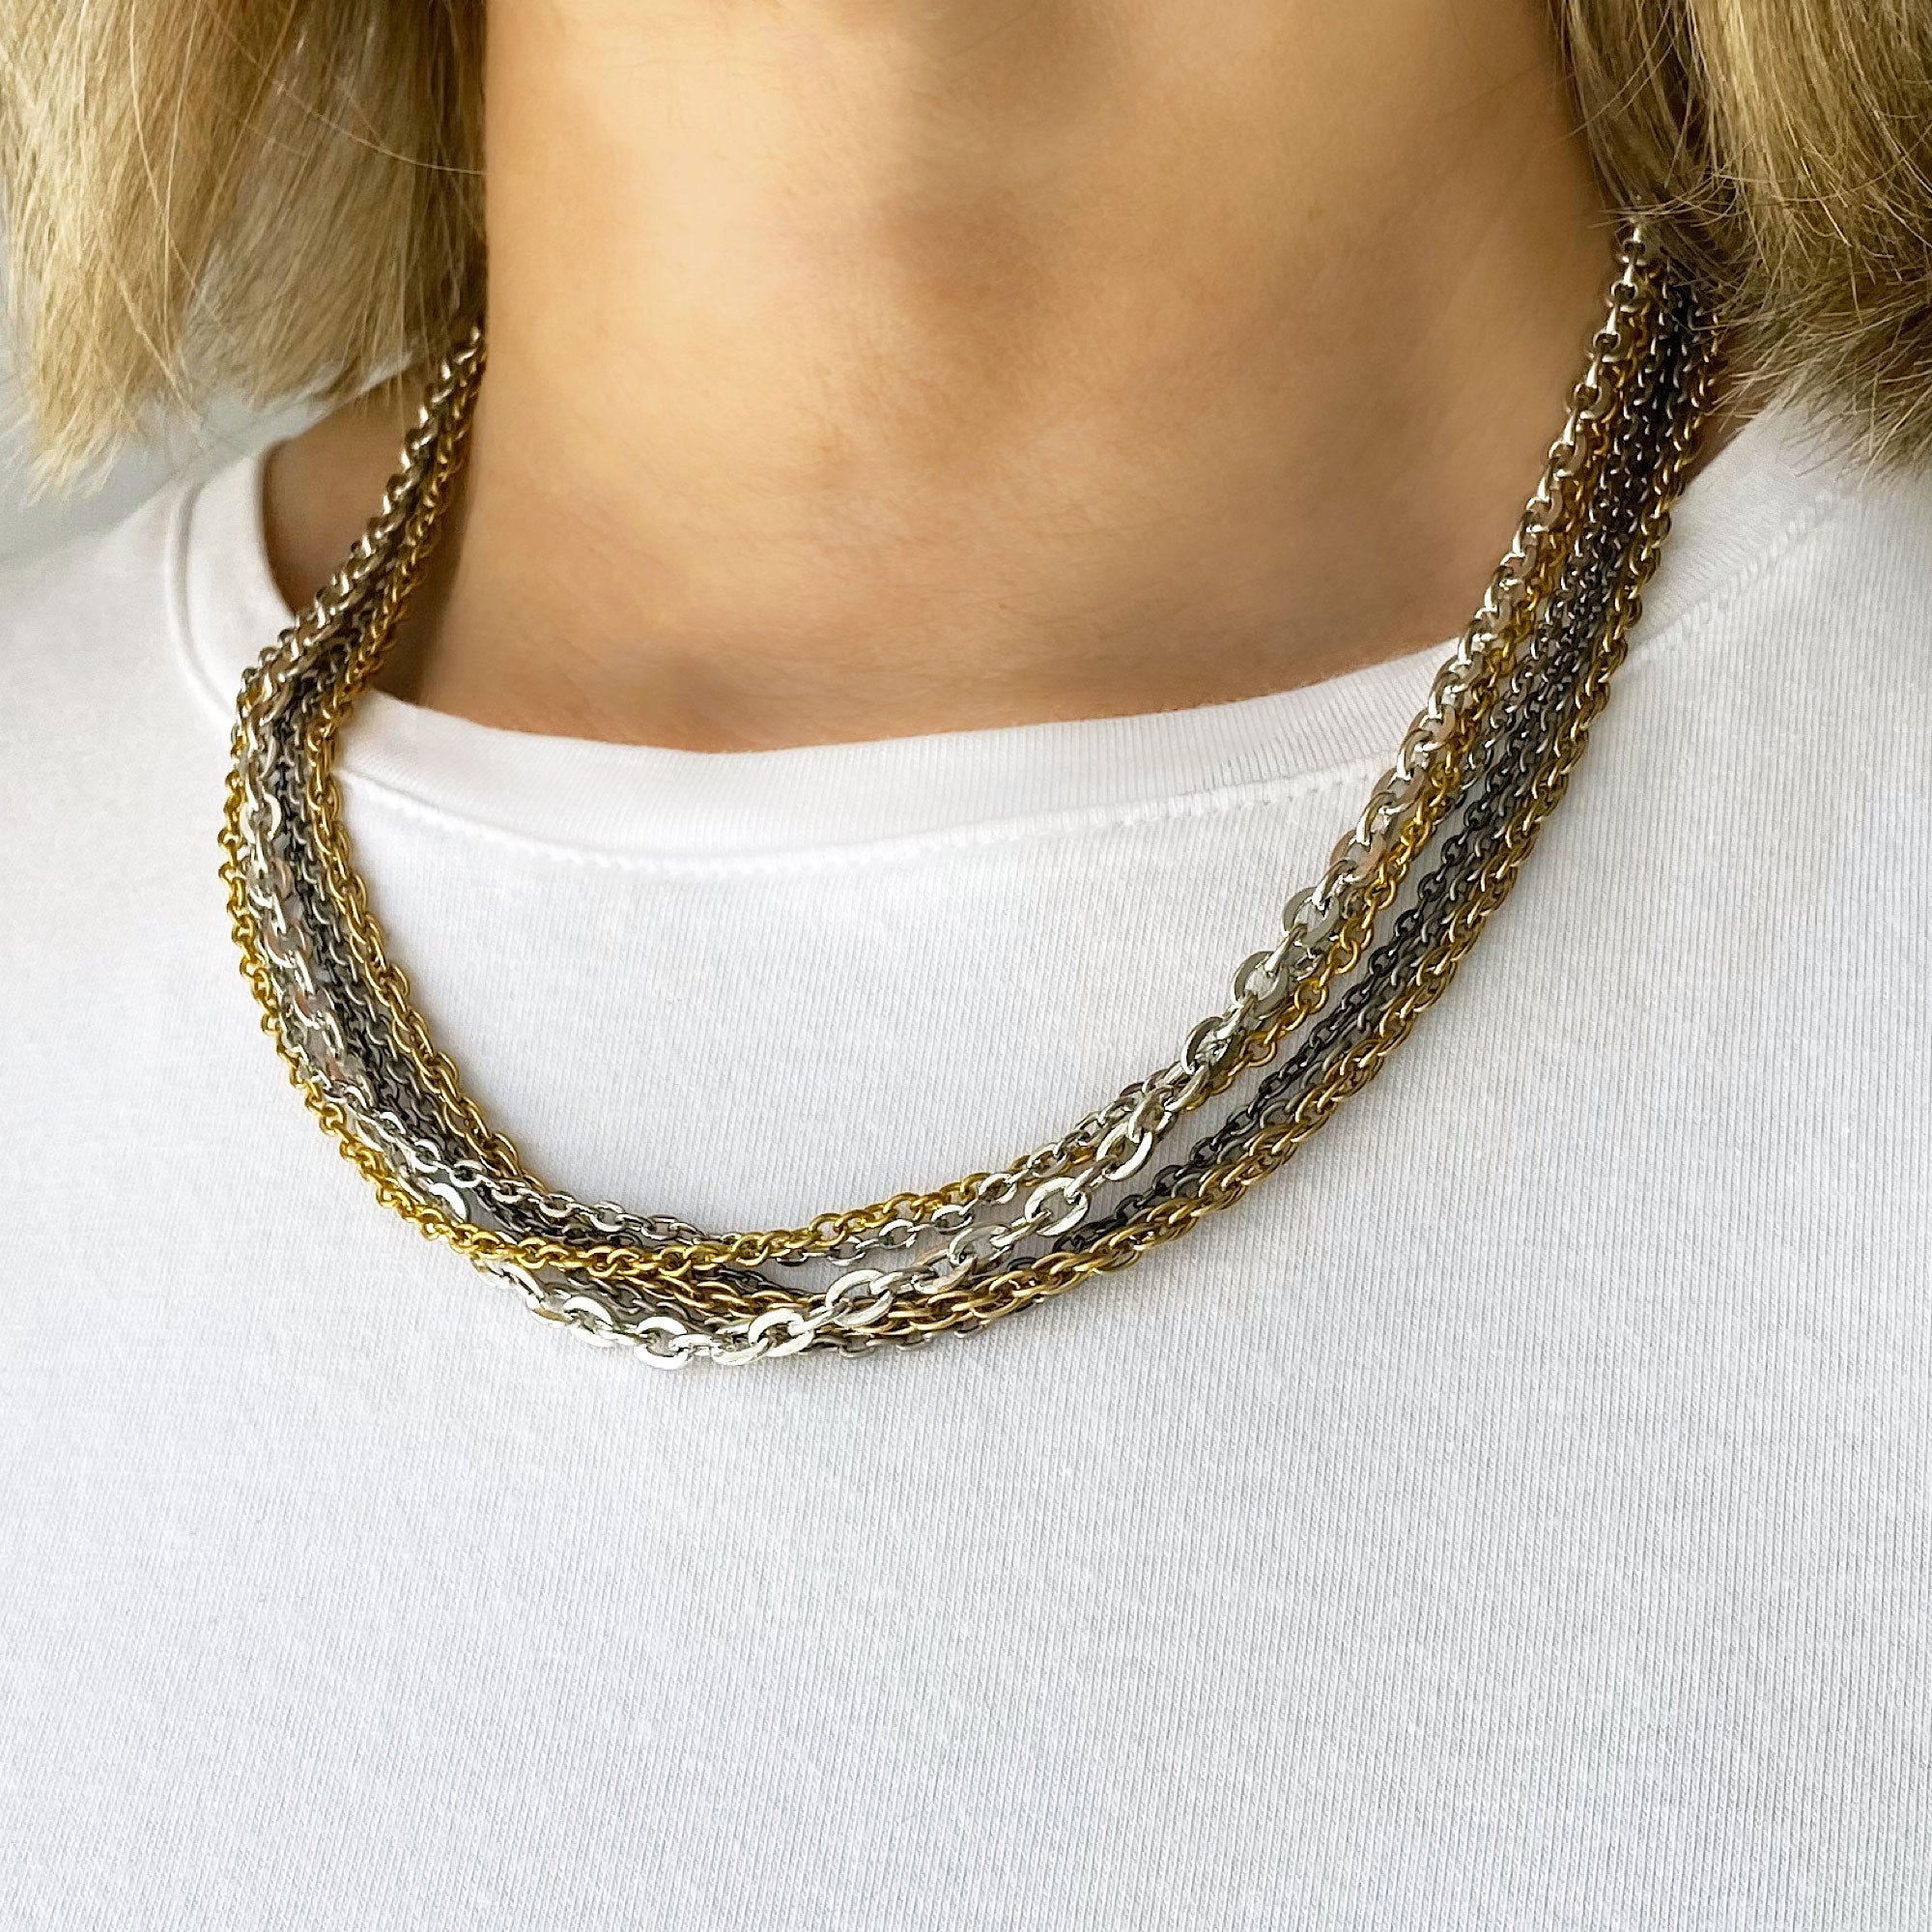 MASON mixed metal chain necklace